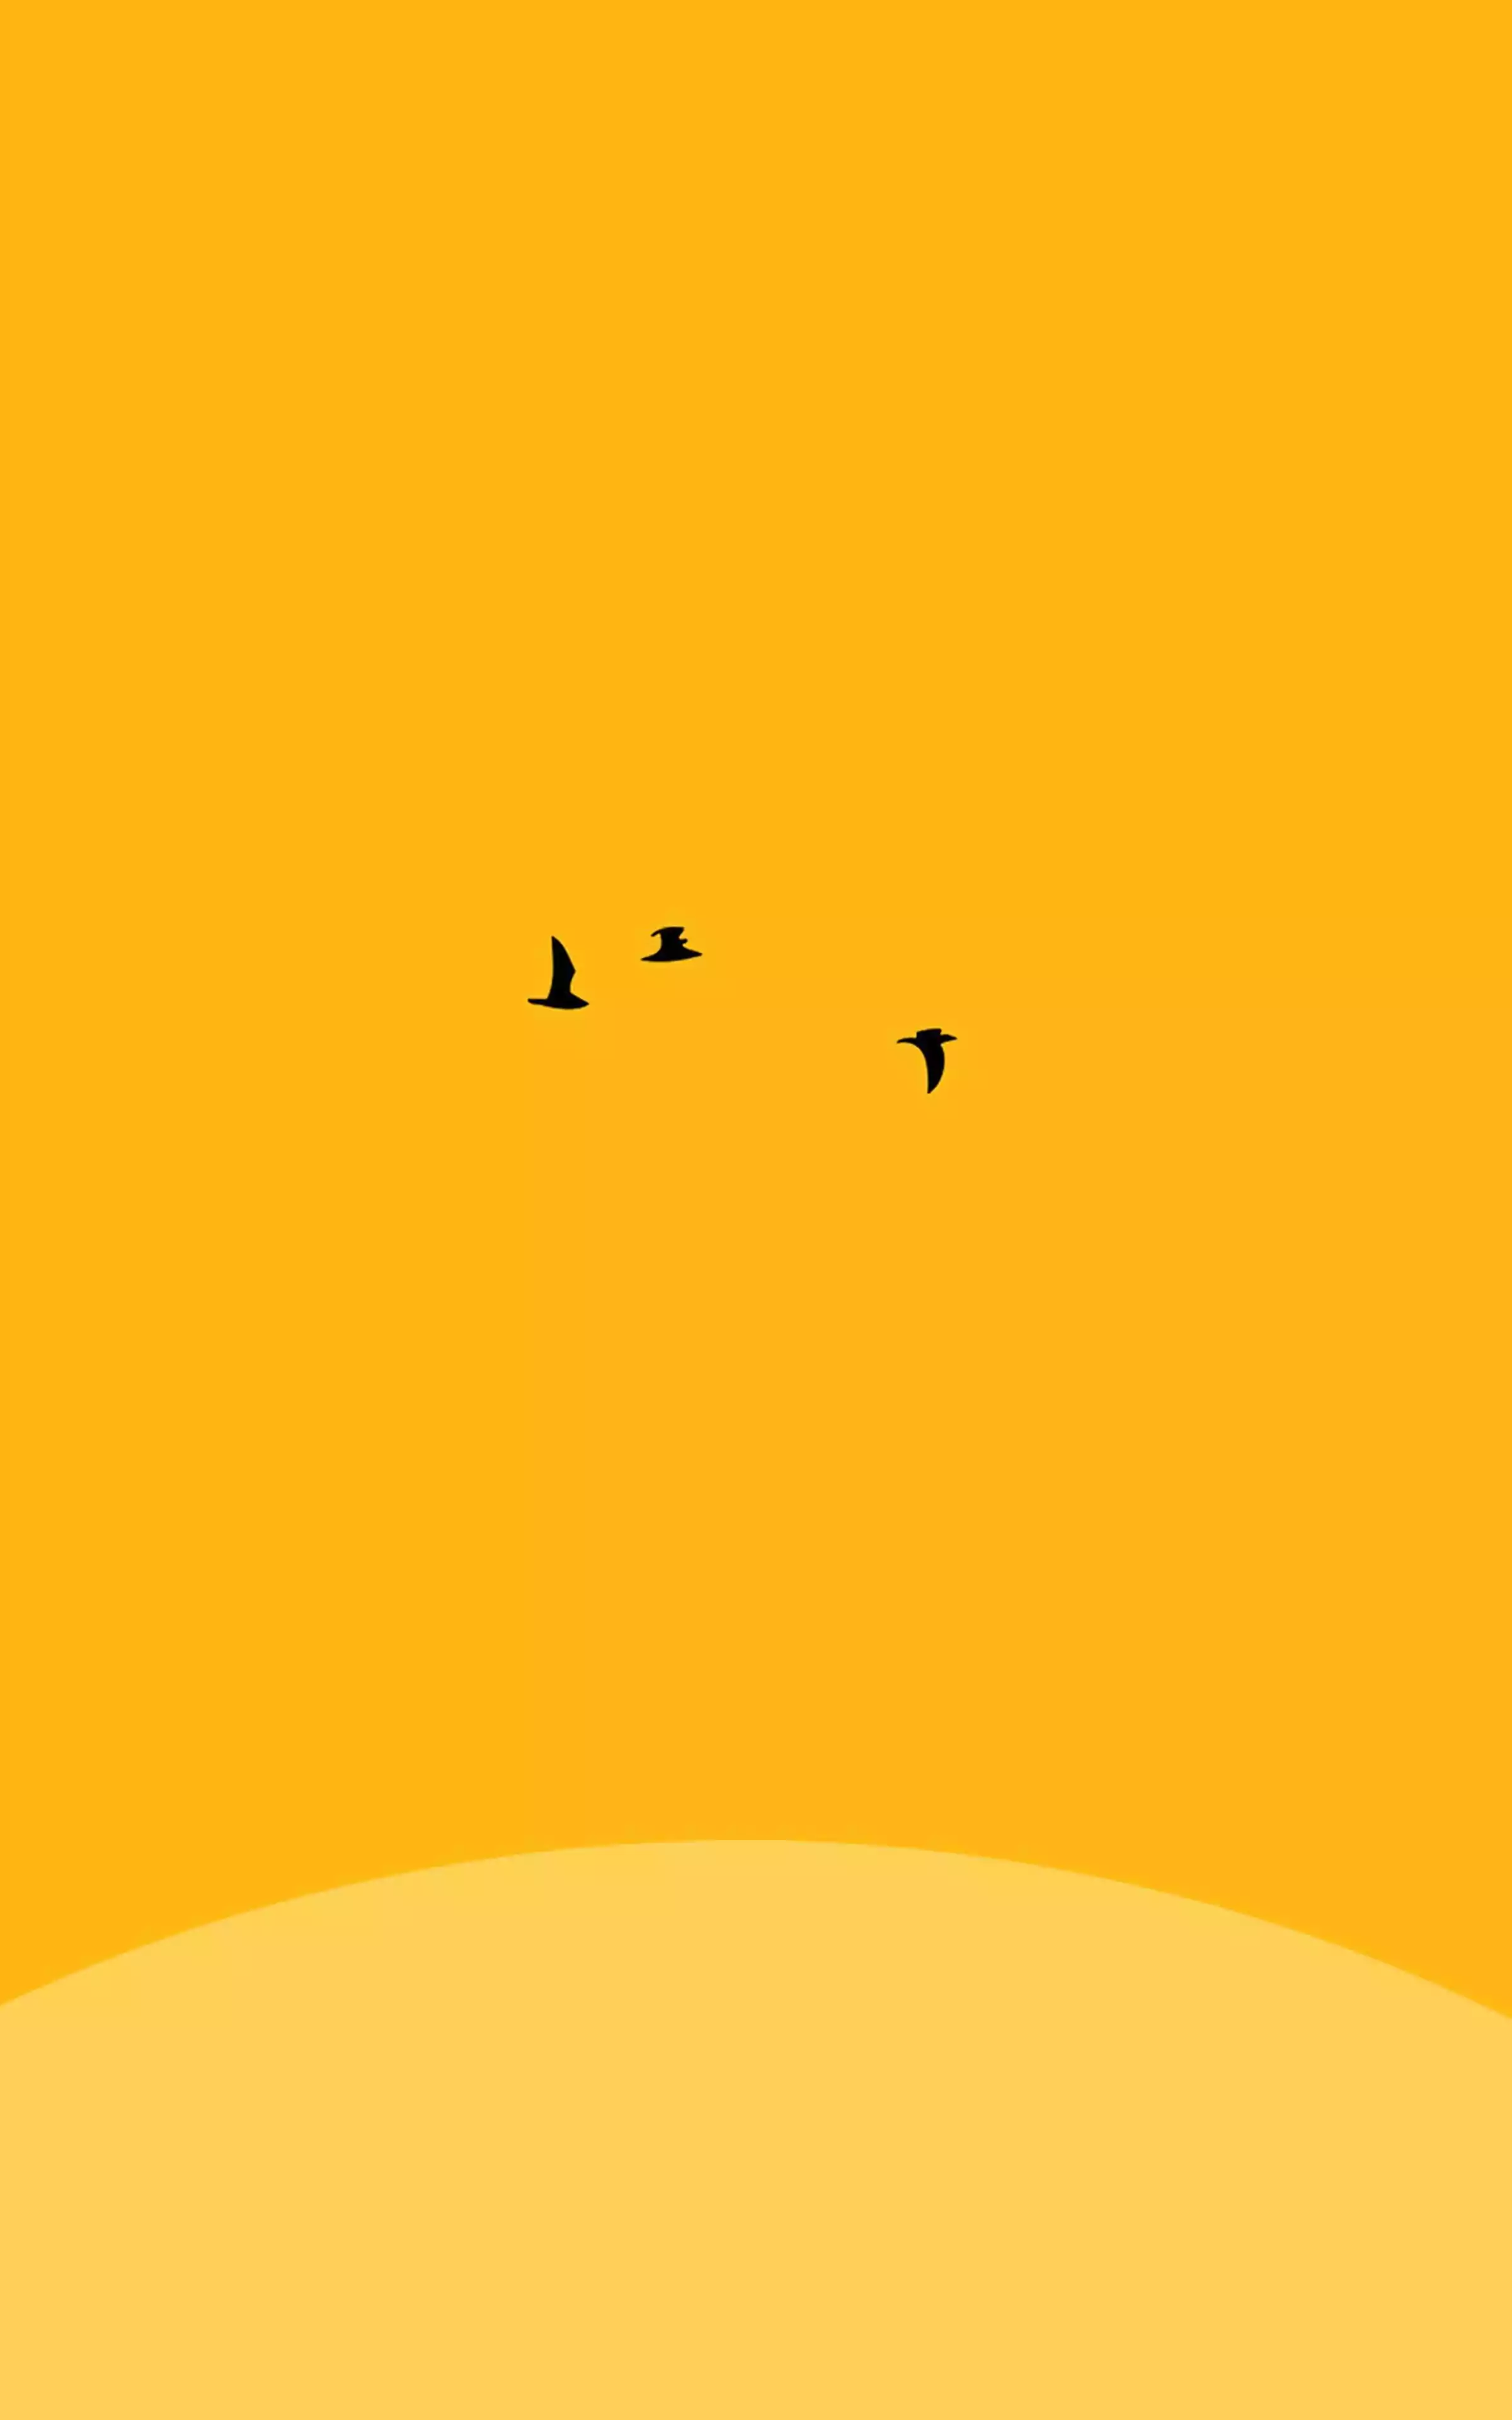 A yellow background with birds flying in the sky - Abstract